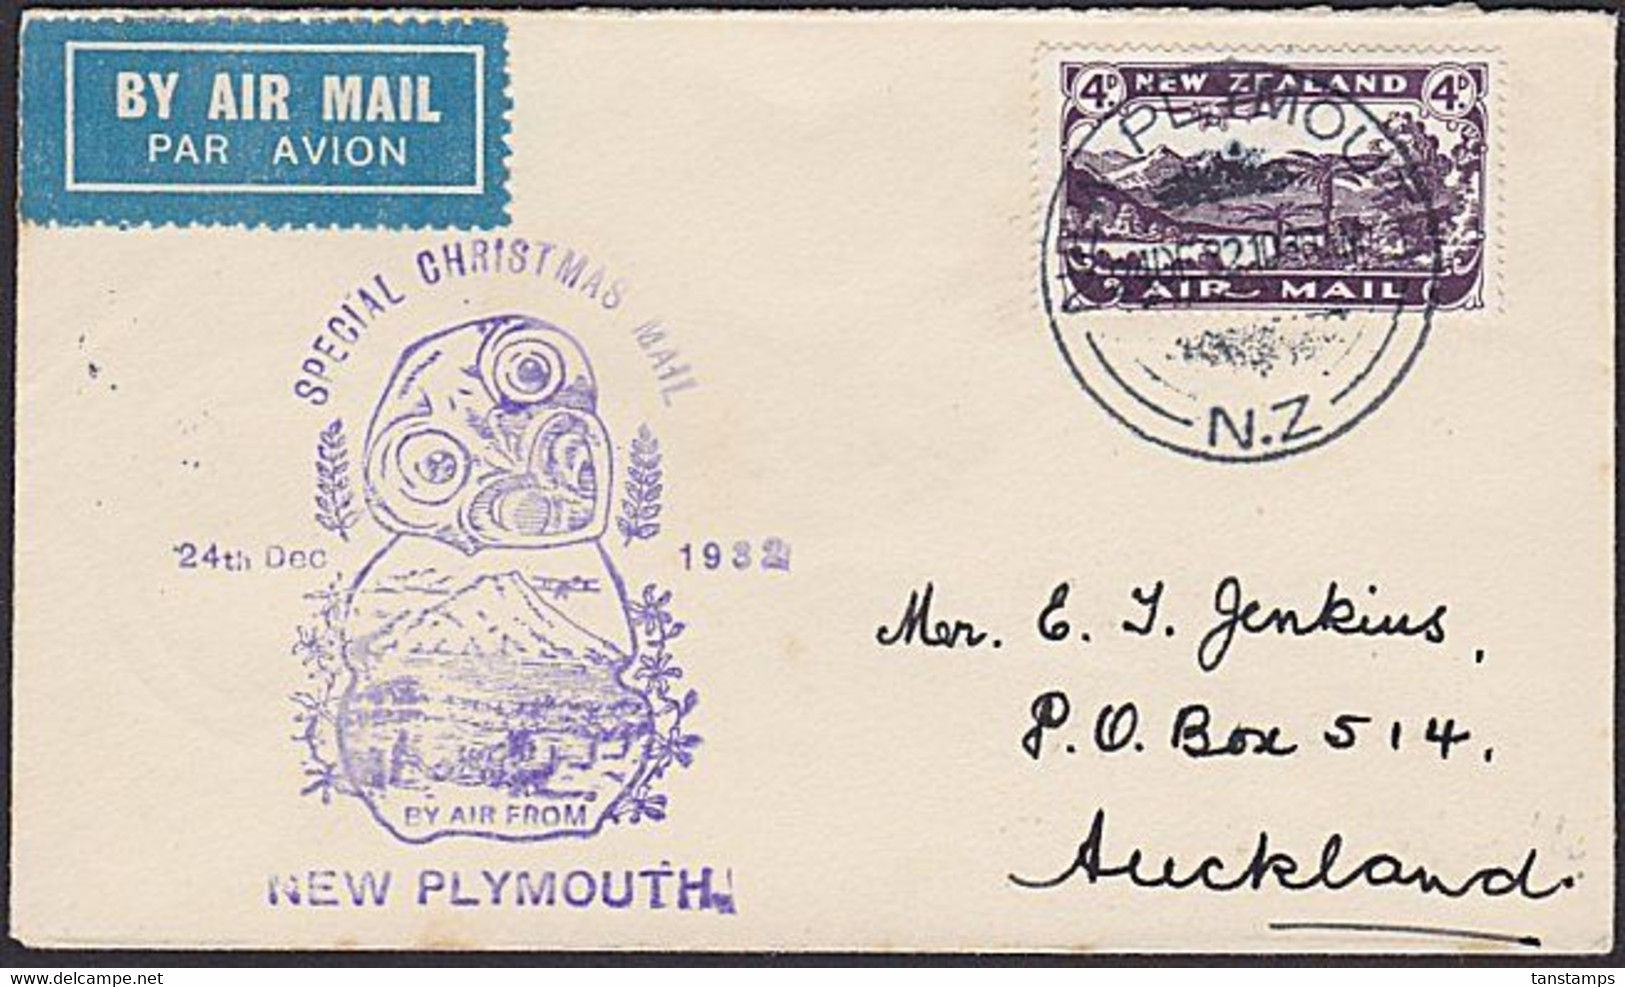 SPECIAL CHRISTMAS FLIGHT 1932 NEW PLYMOUTH - AUCKLAND * - Luftpost